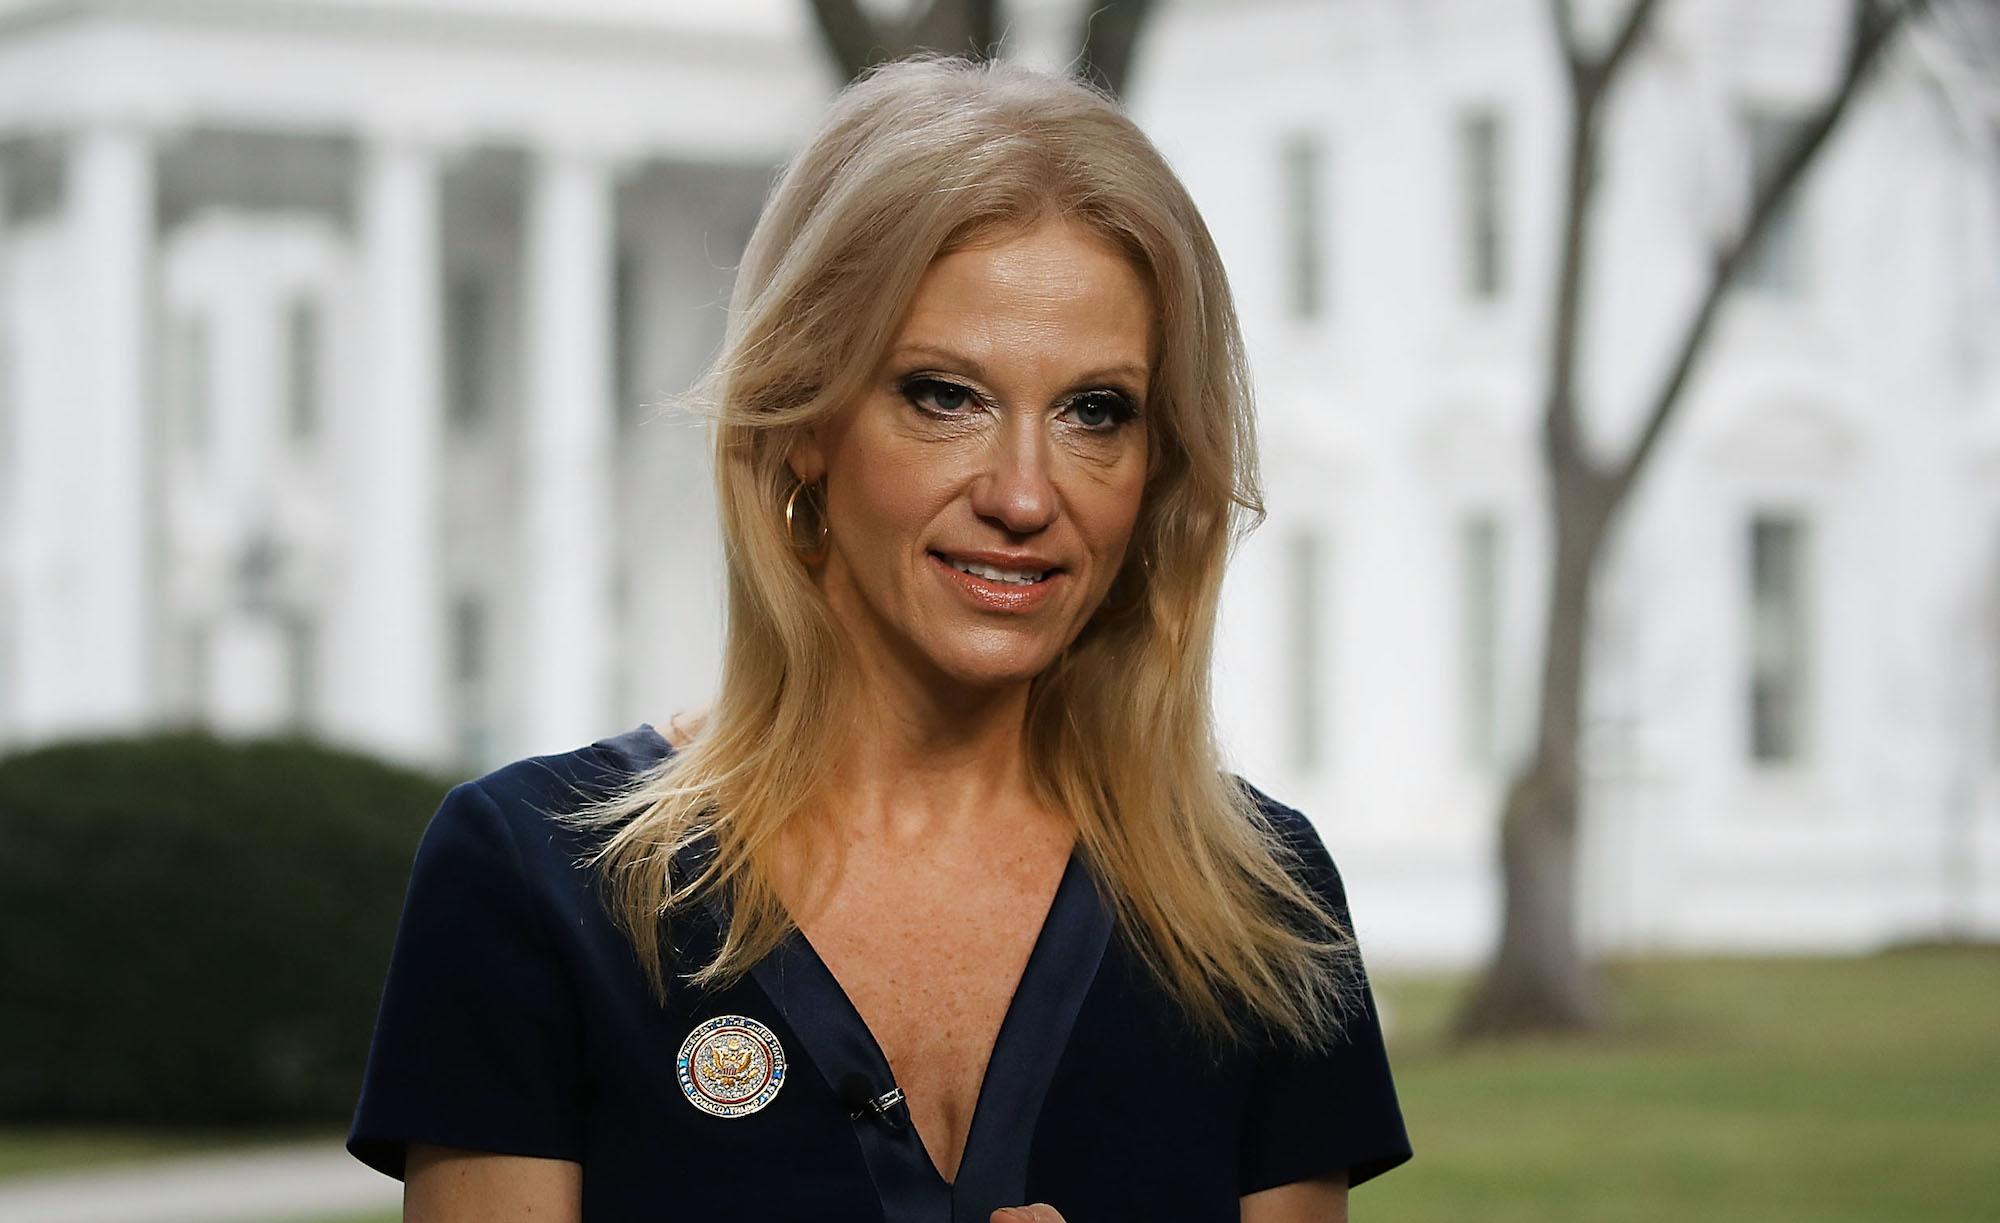 Just a reminder, Conway is the woman who coined the phrase ‘alternative facts’